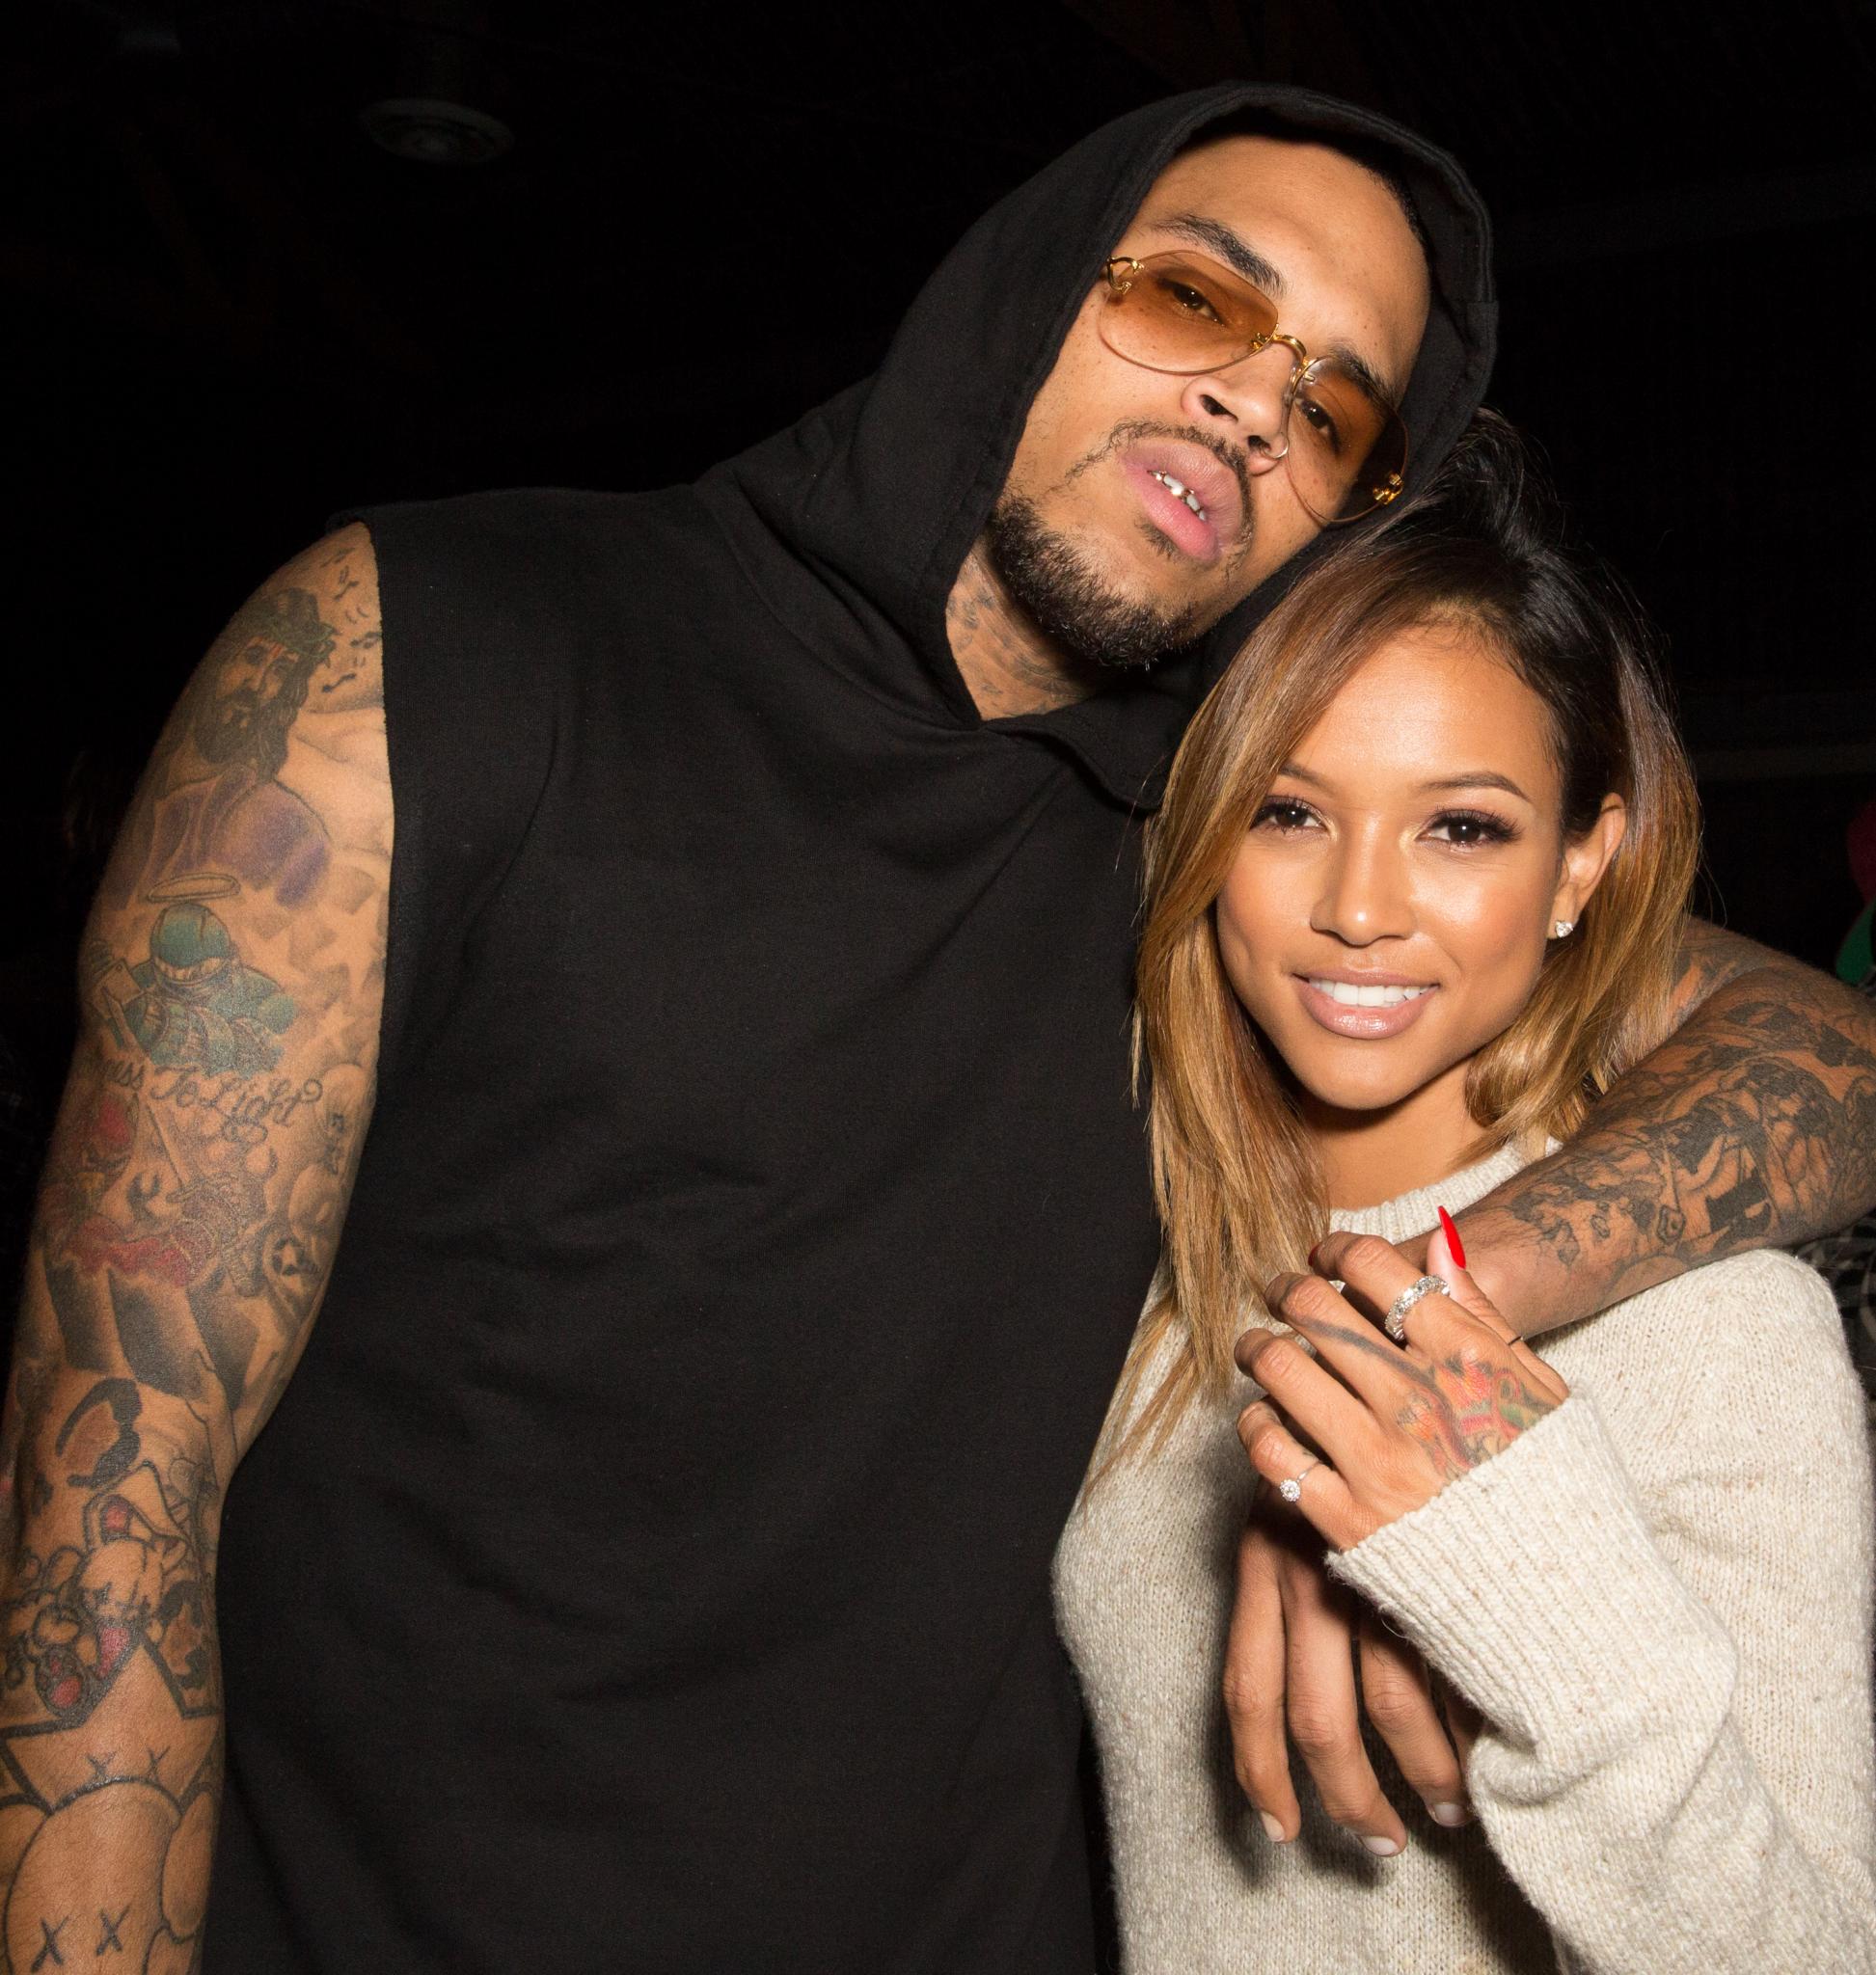 Chris Brown, Karrueche And Victim Shaming Fans: Here Are 4 Things You Need To Know About Domestic Violence
